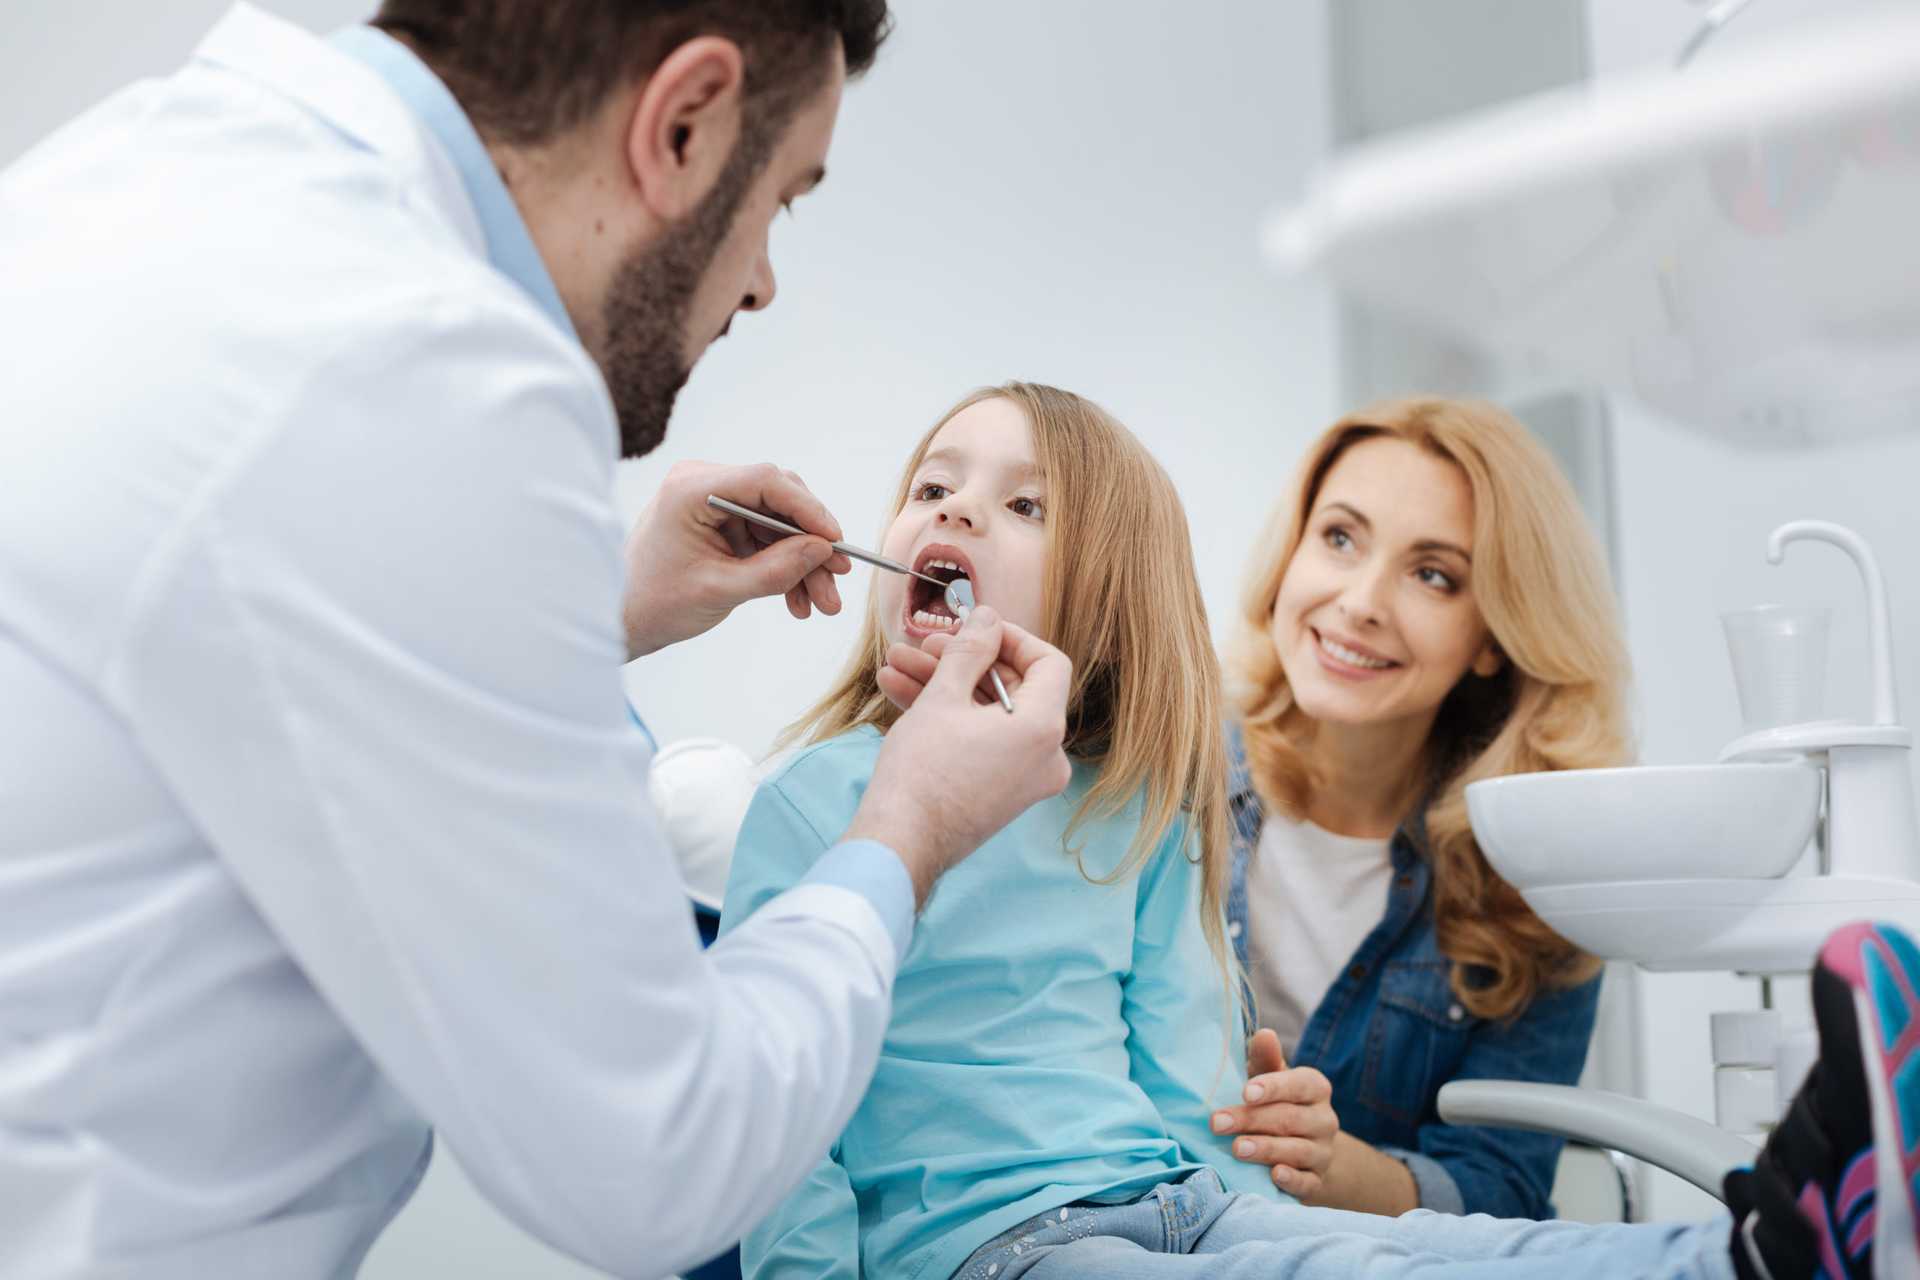 Woman sitting behind girl with mouth open and Dr inspecting teeth